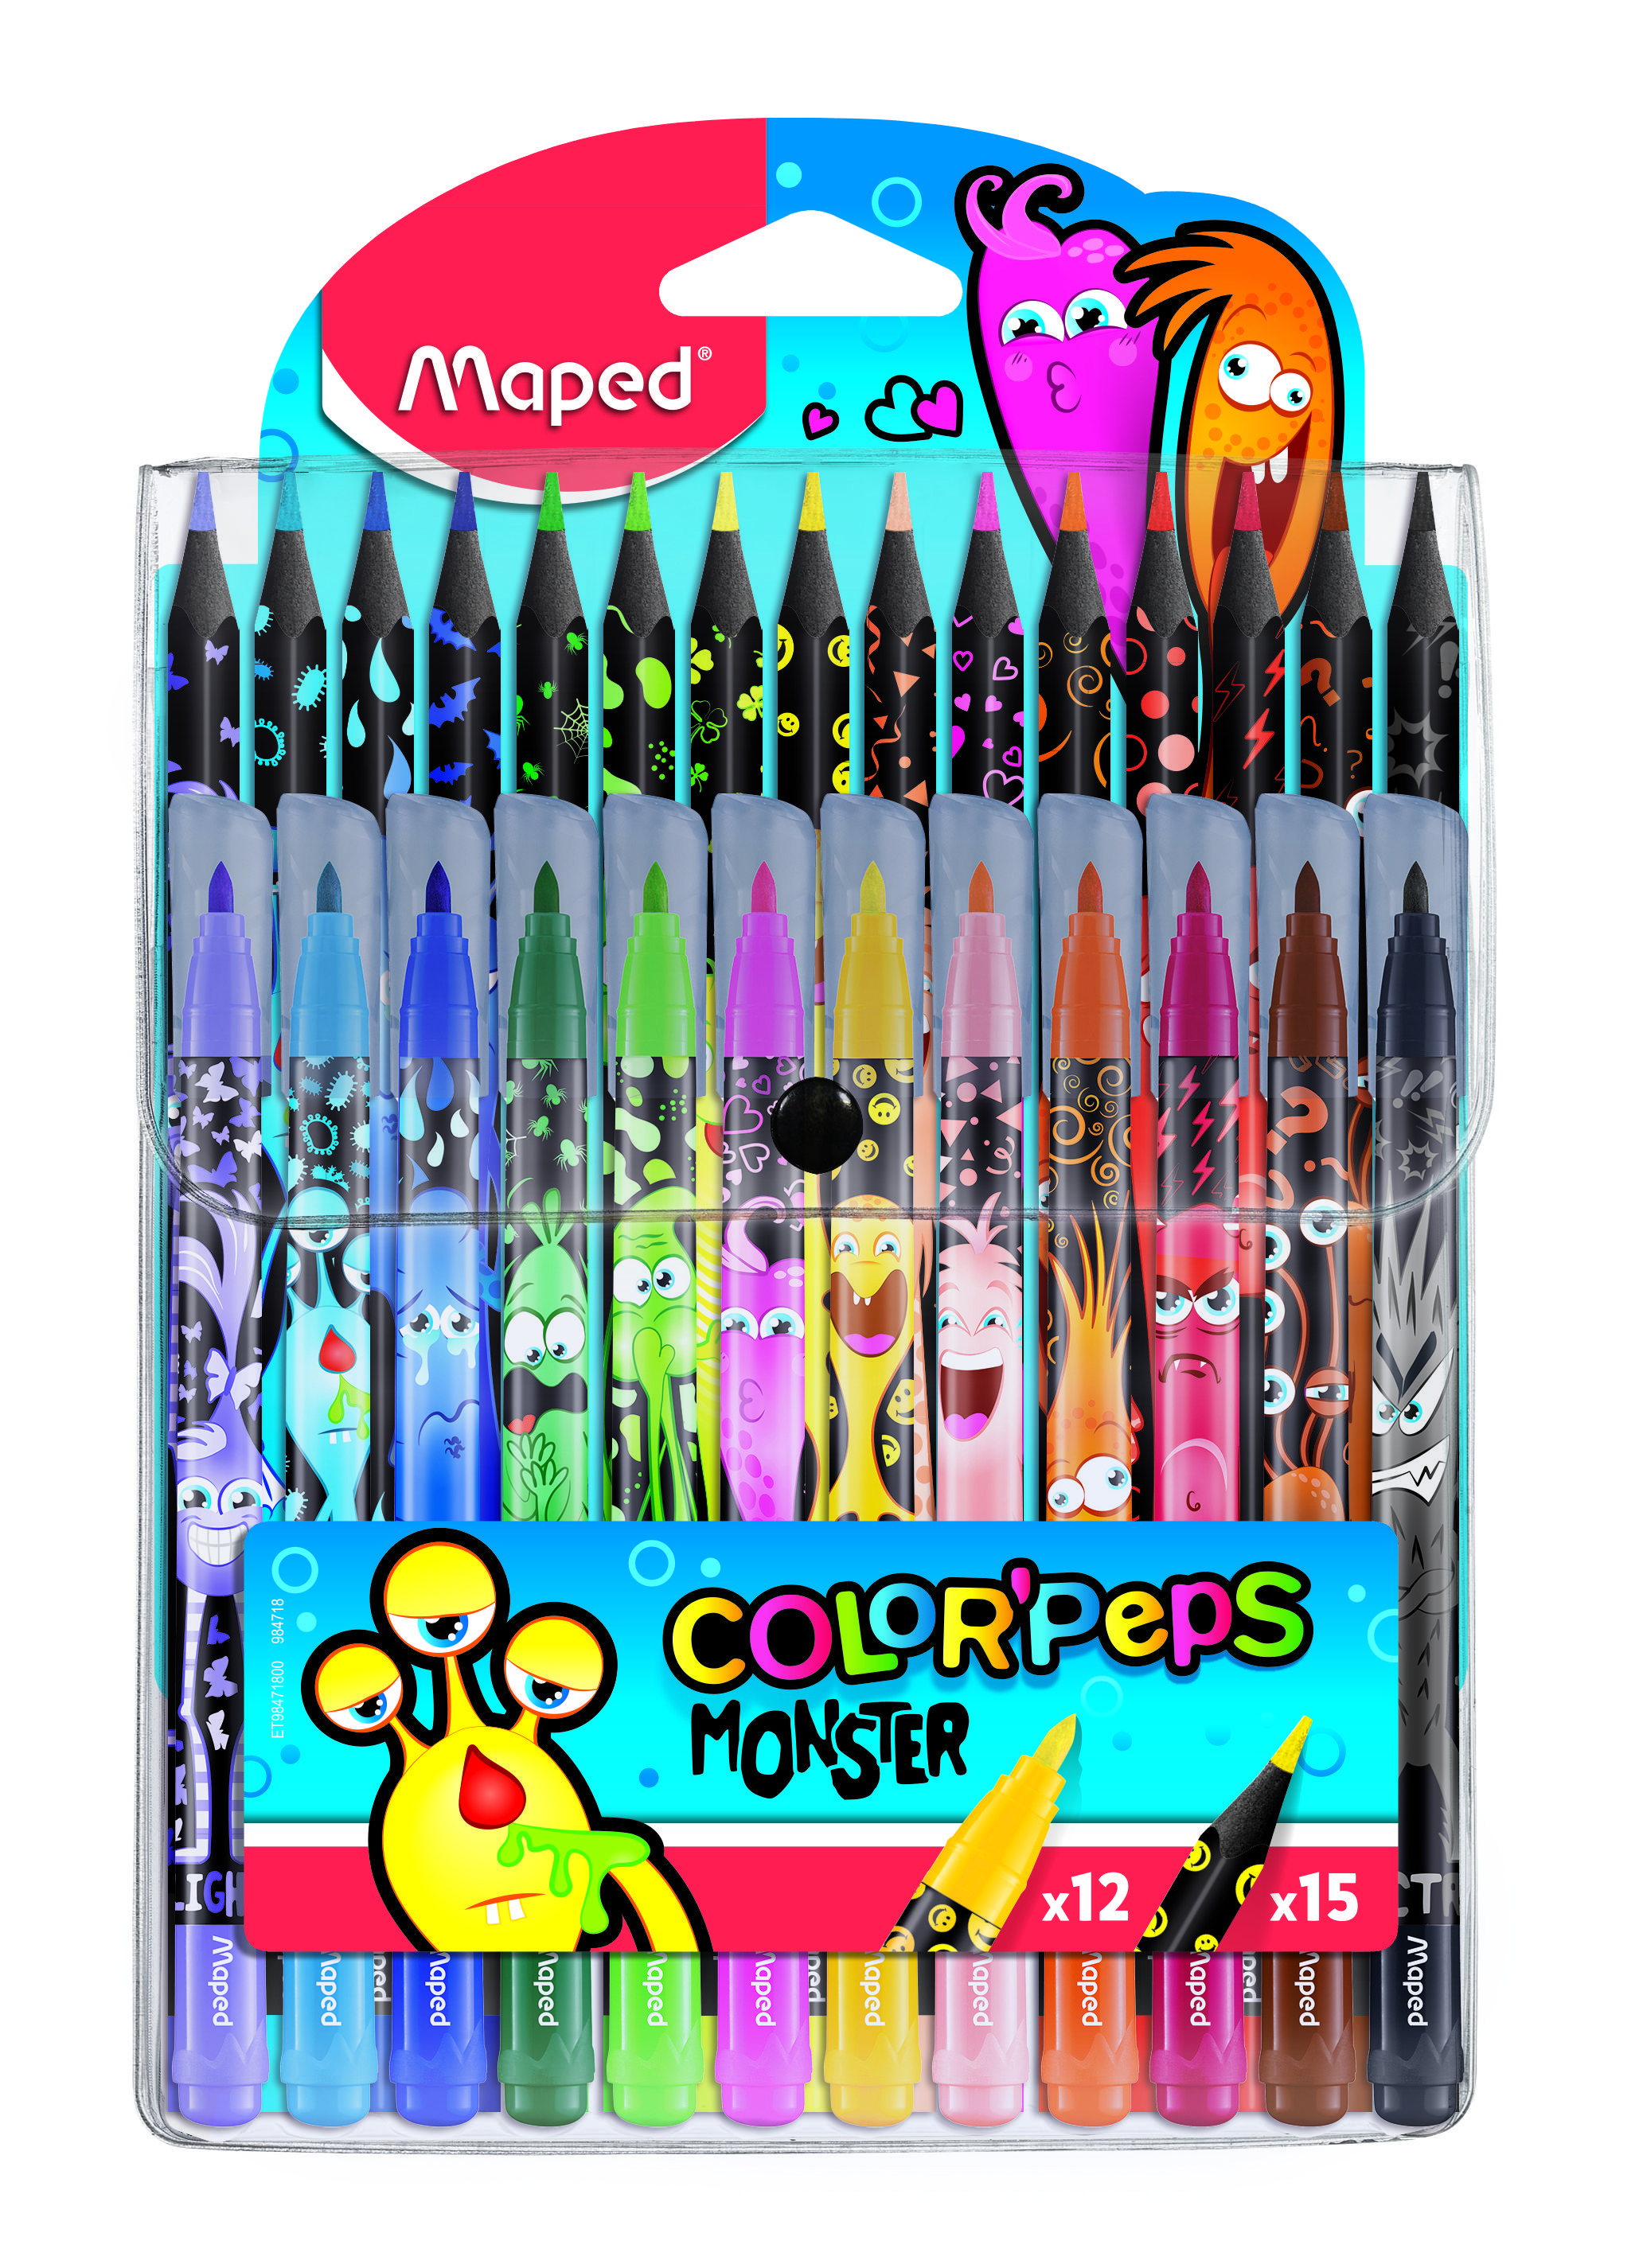    MAPED COLOR'PEPS MONSTER 12 , 15   ,  ,   